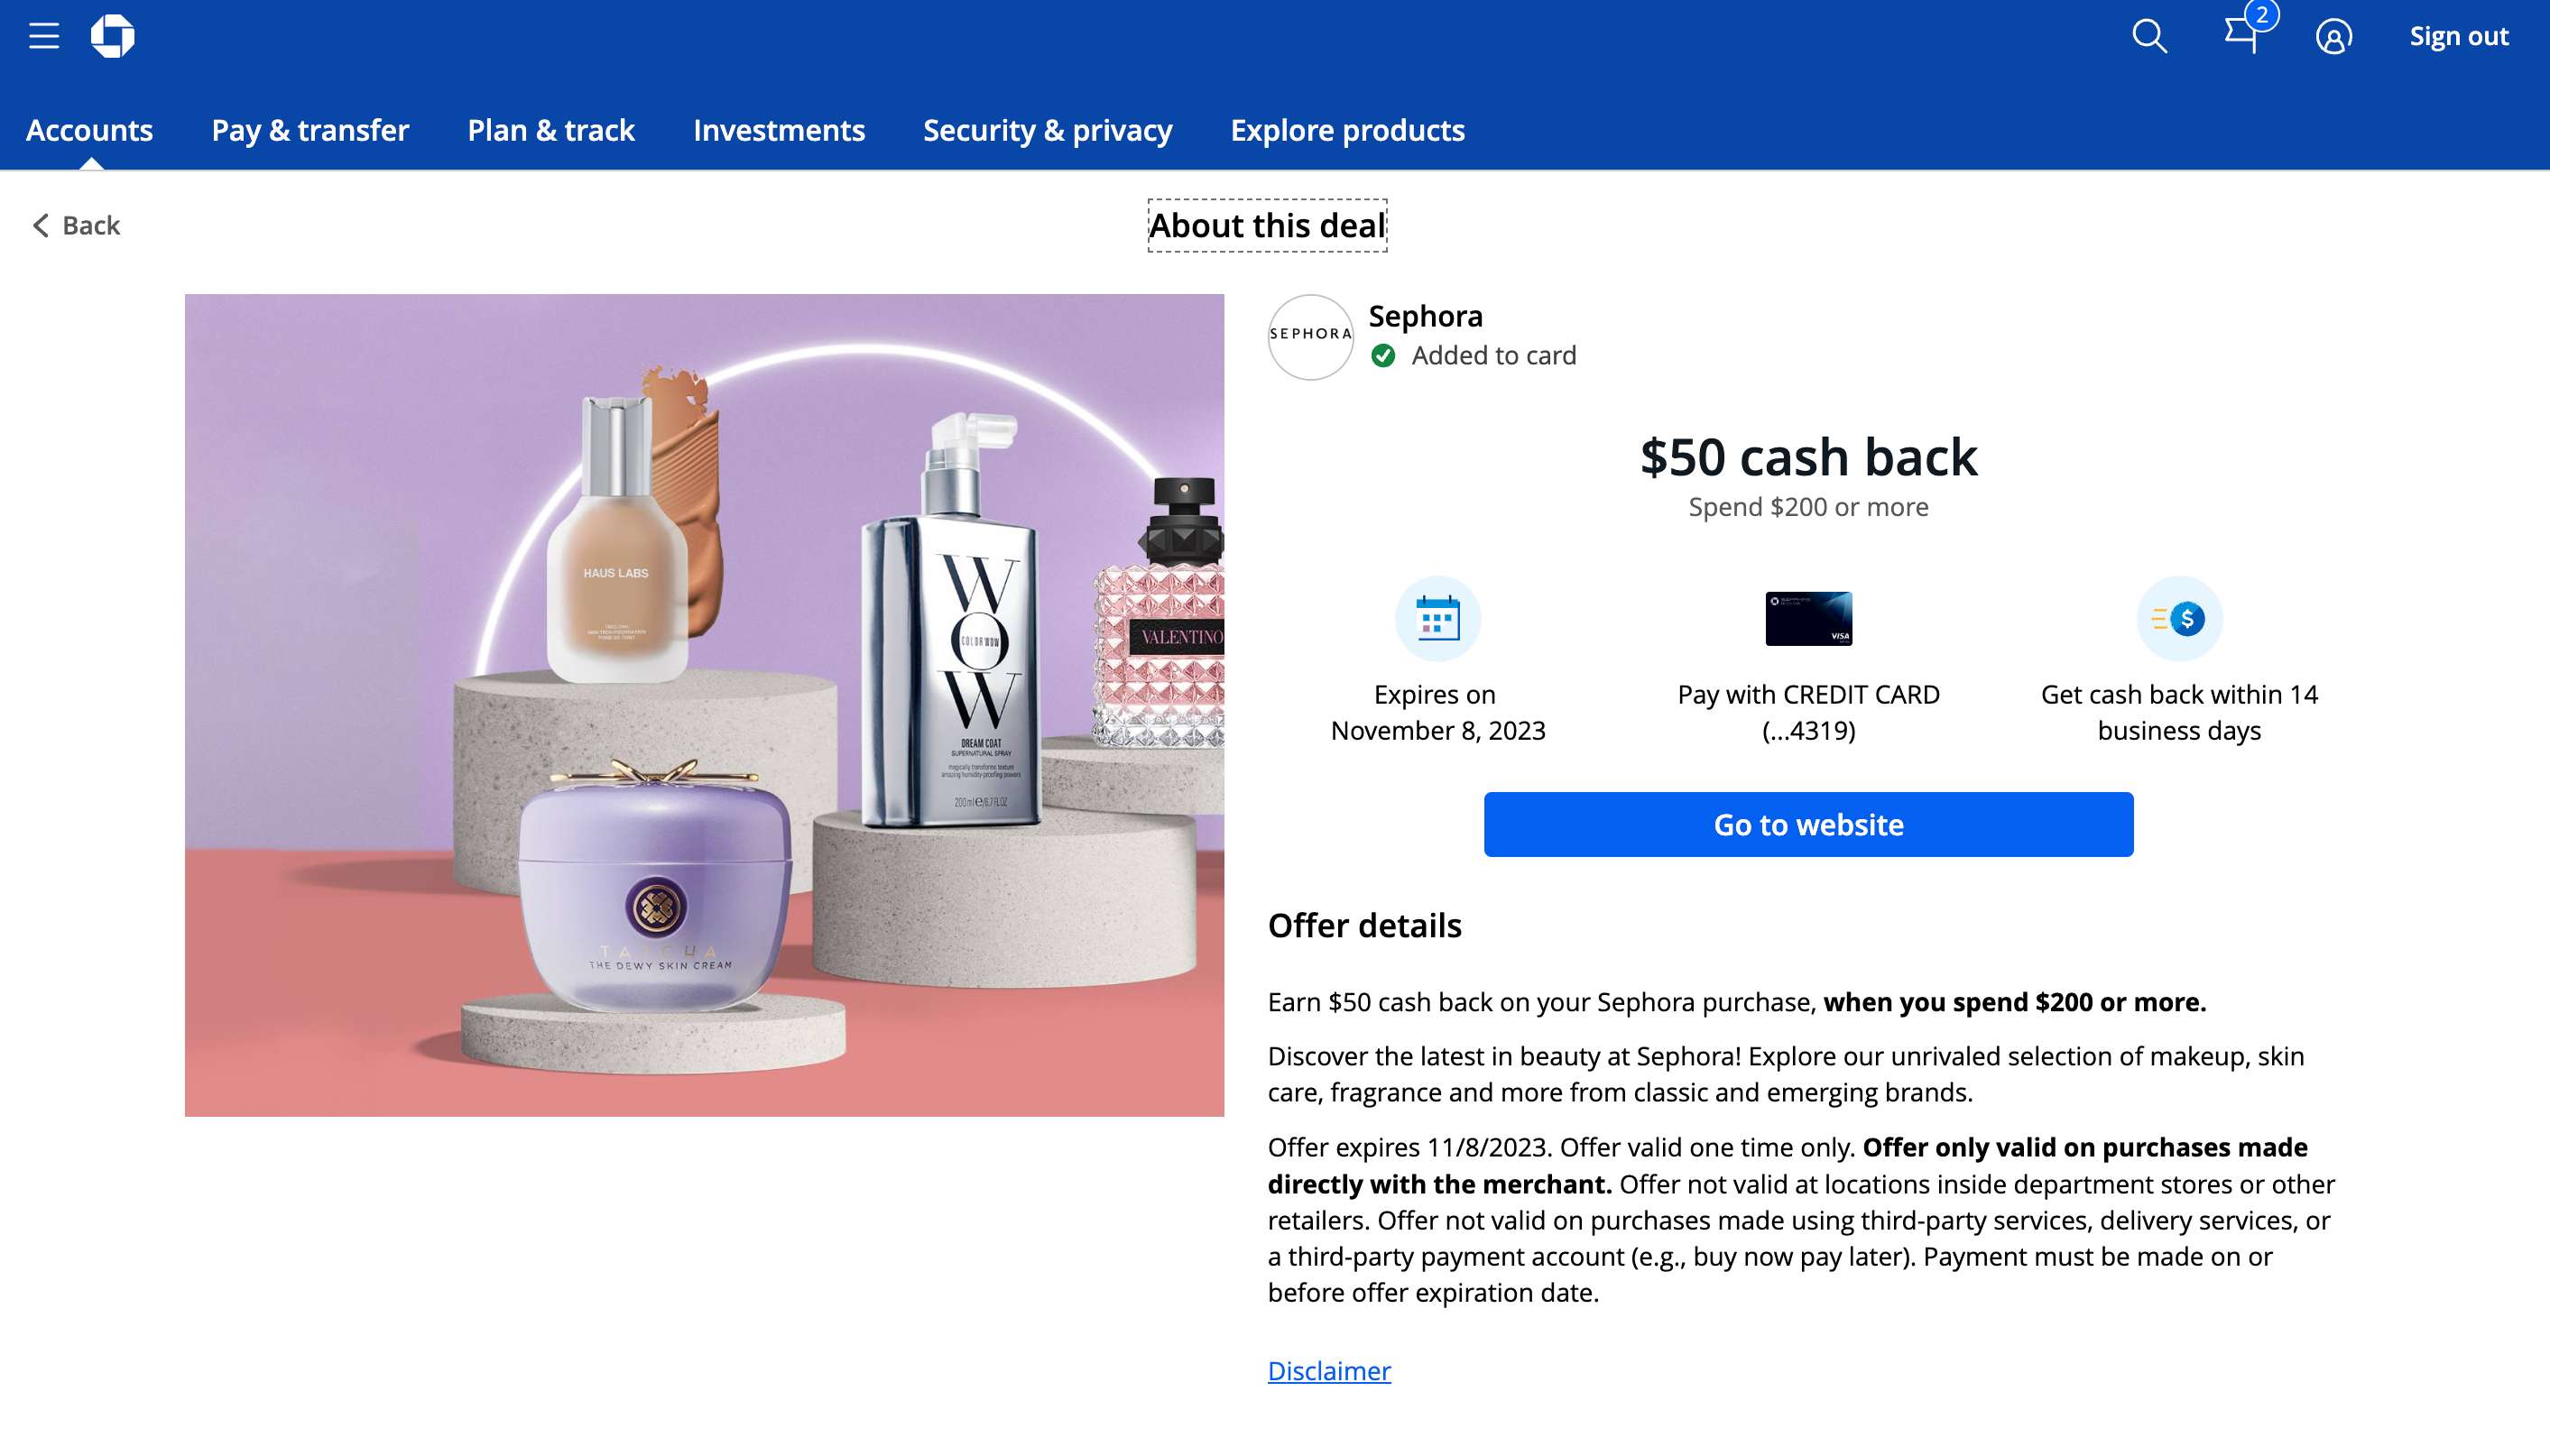 Chase Sapphire Reserve : Sephora Spend $200 or more get $50 back (YMMV)